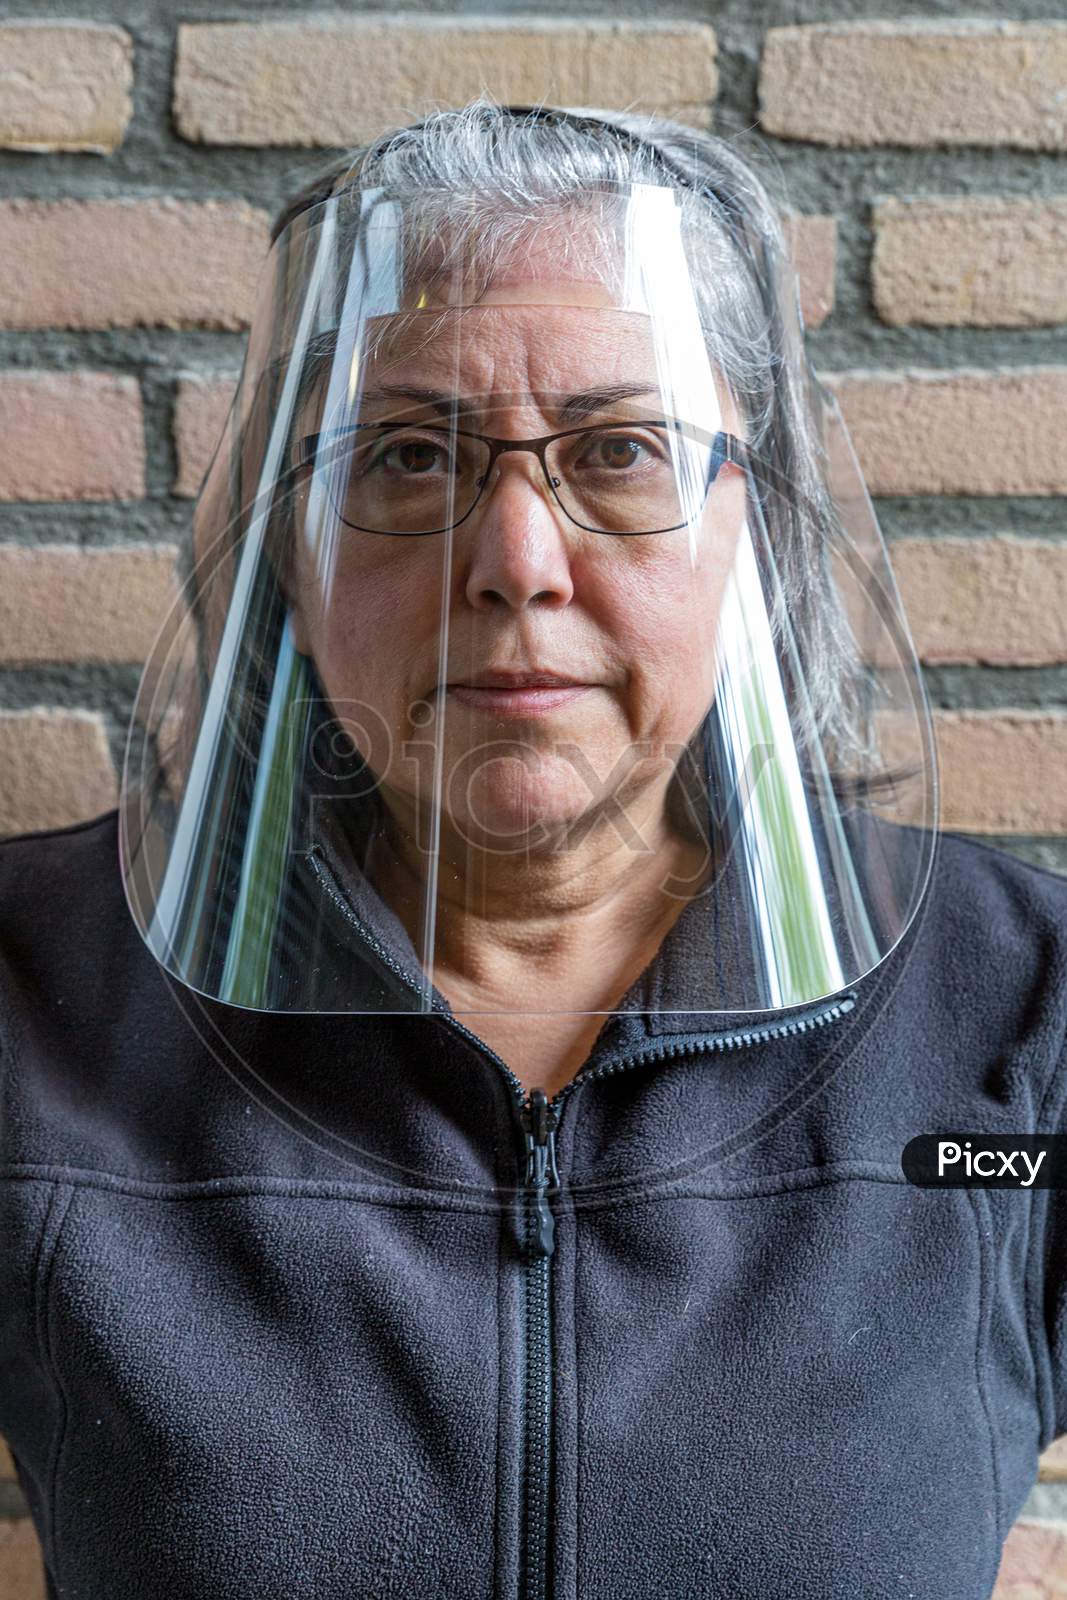 Face Shield Or Protection Medical Screen On A Mature Woman Wearing Glasses To Prevent The Spread Of Covid-19 Amid The Coronavirus Outbreak, New Lifestyle, Front View